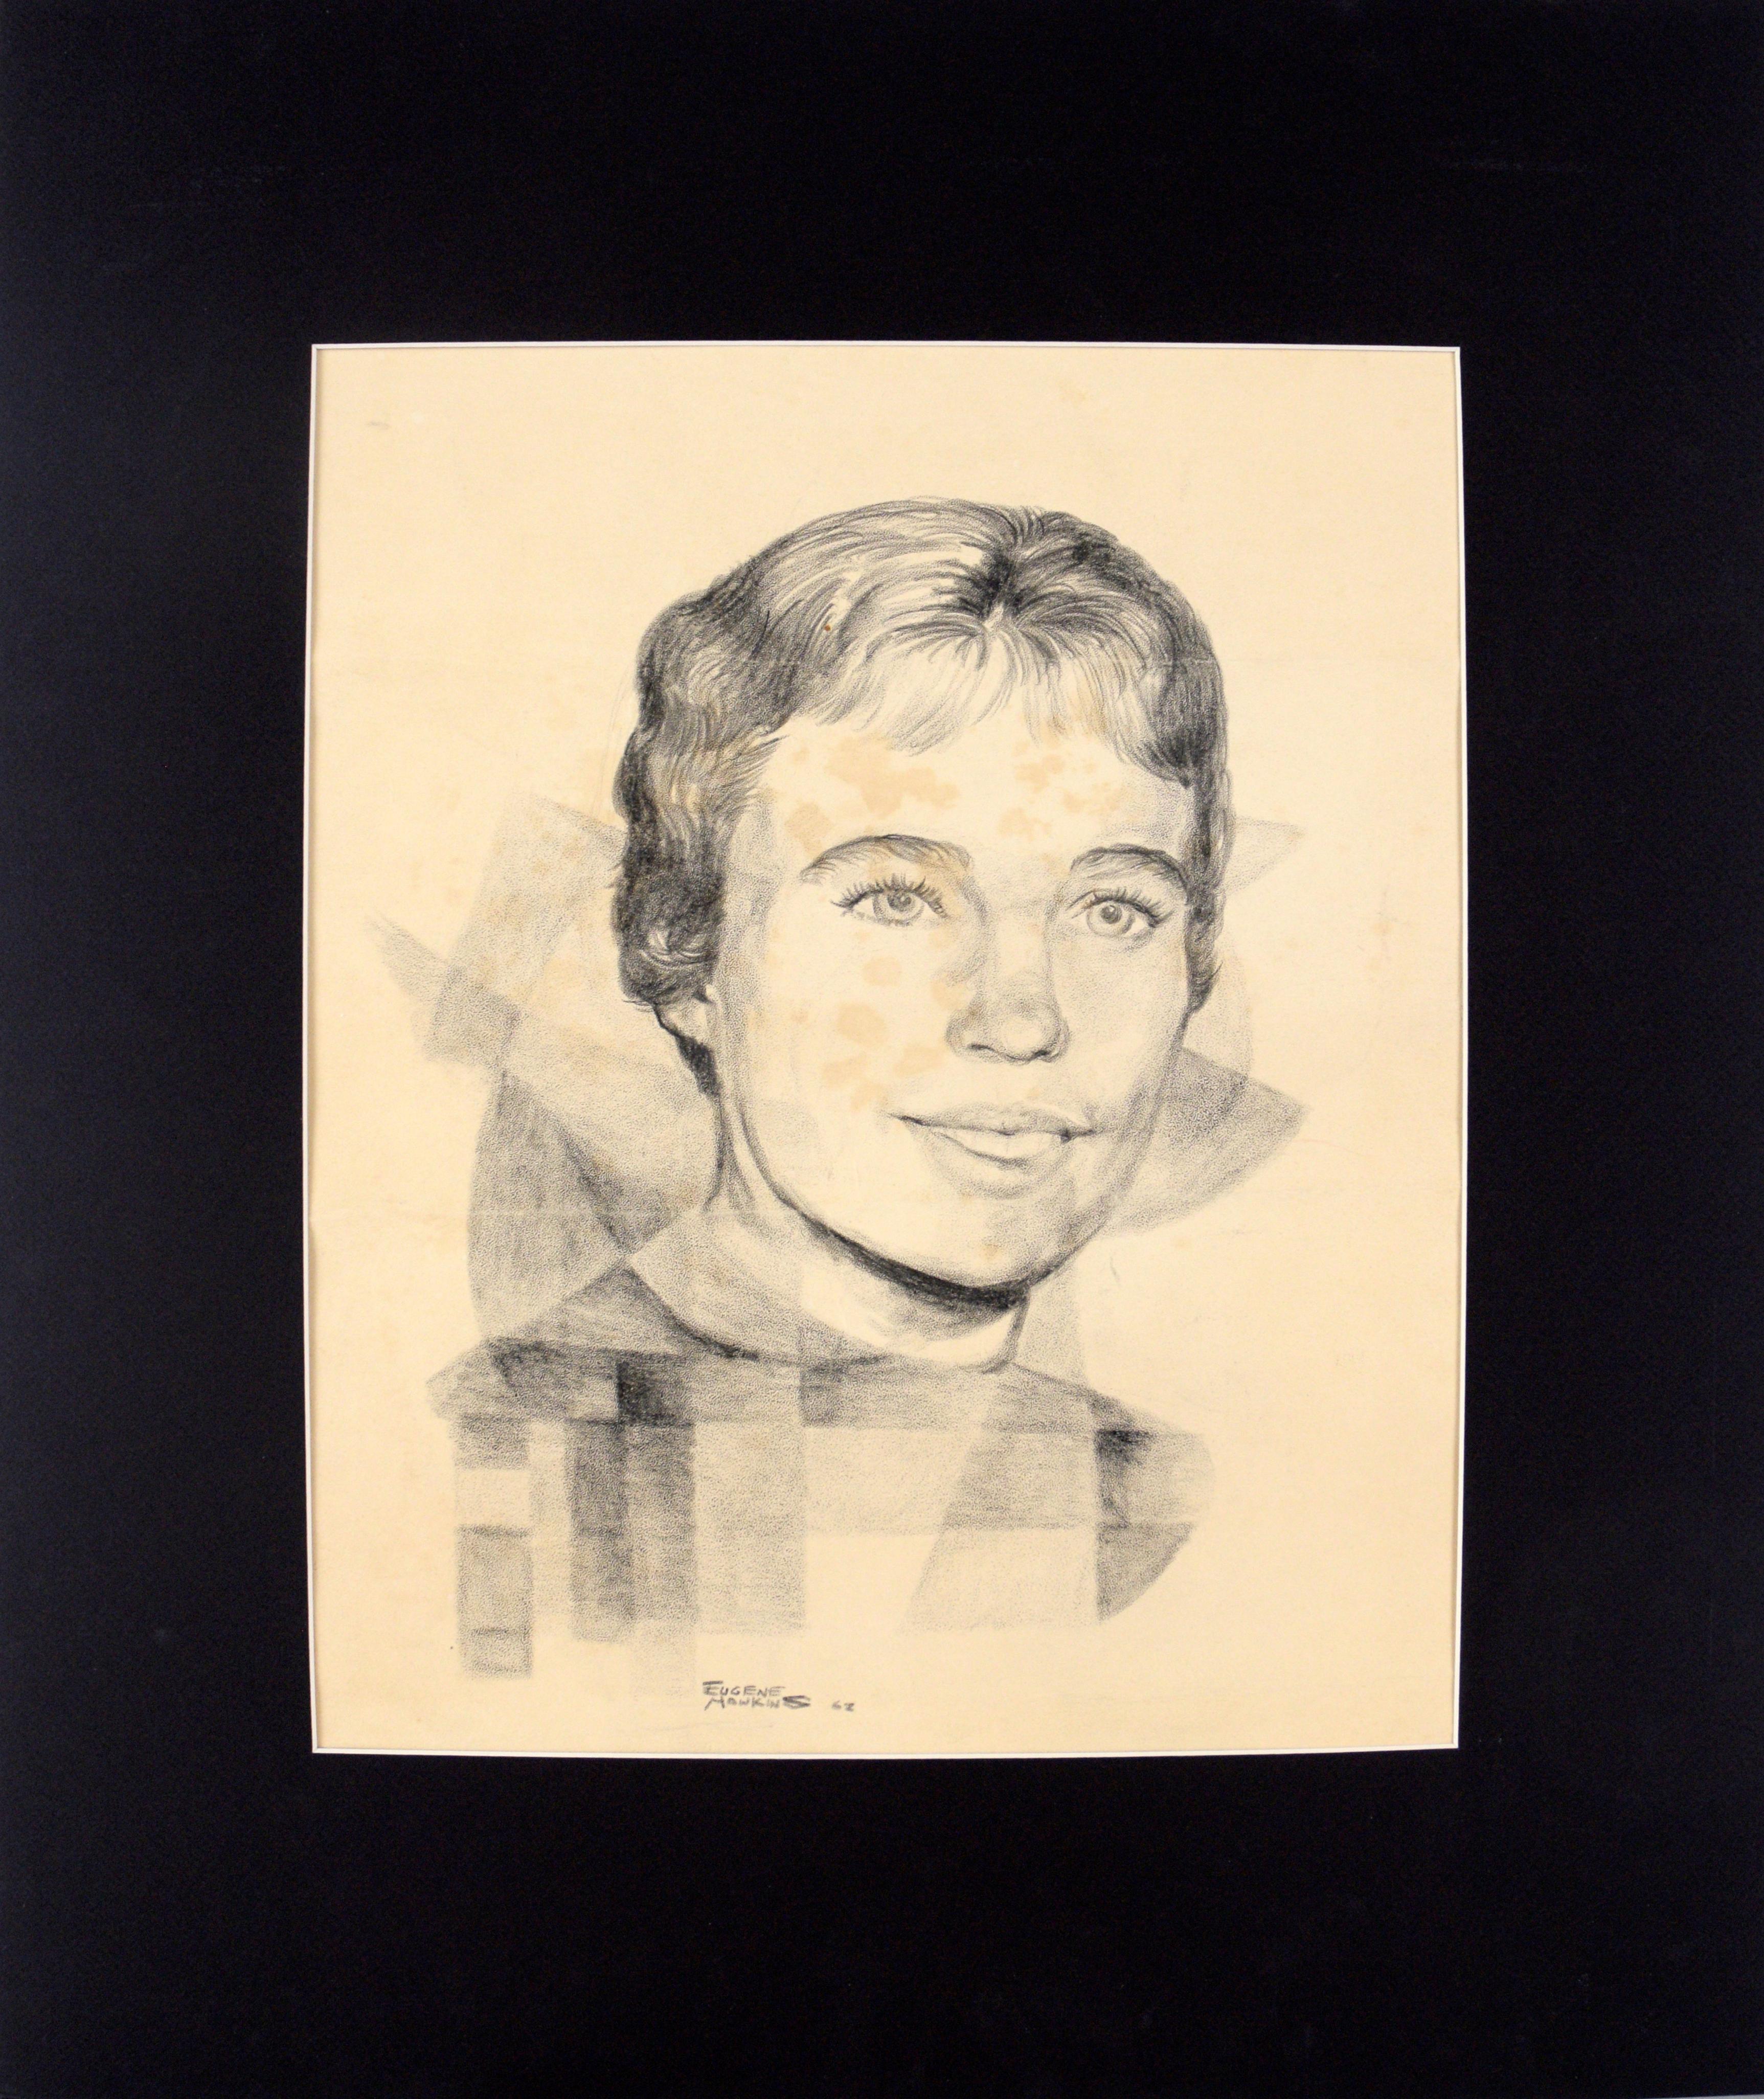 Geometric Woman's Portrait - Rare Signed Graphite Drawing on Paper 1962